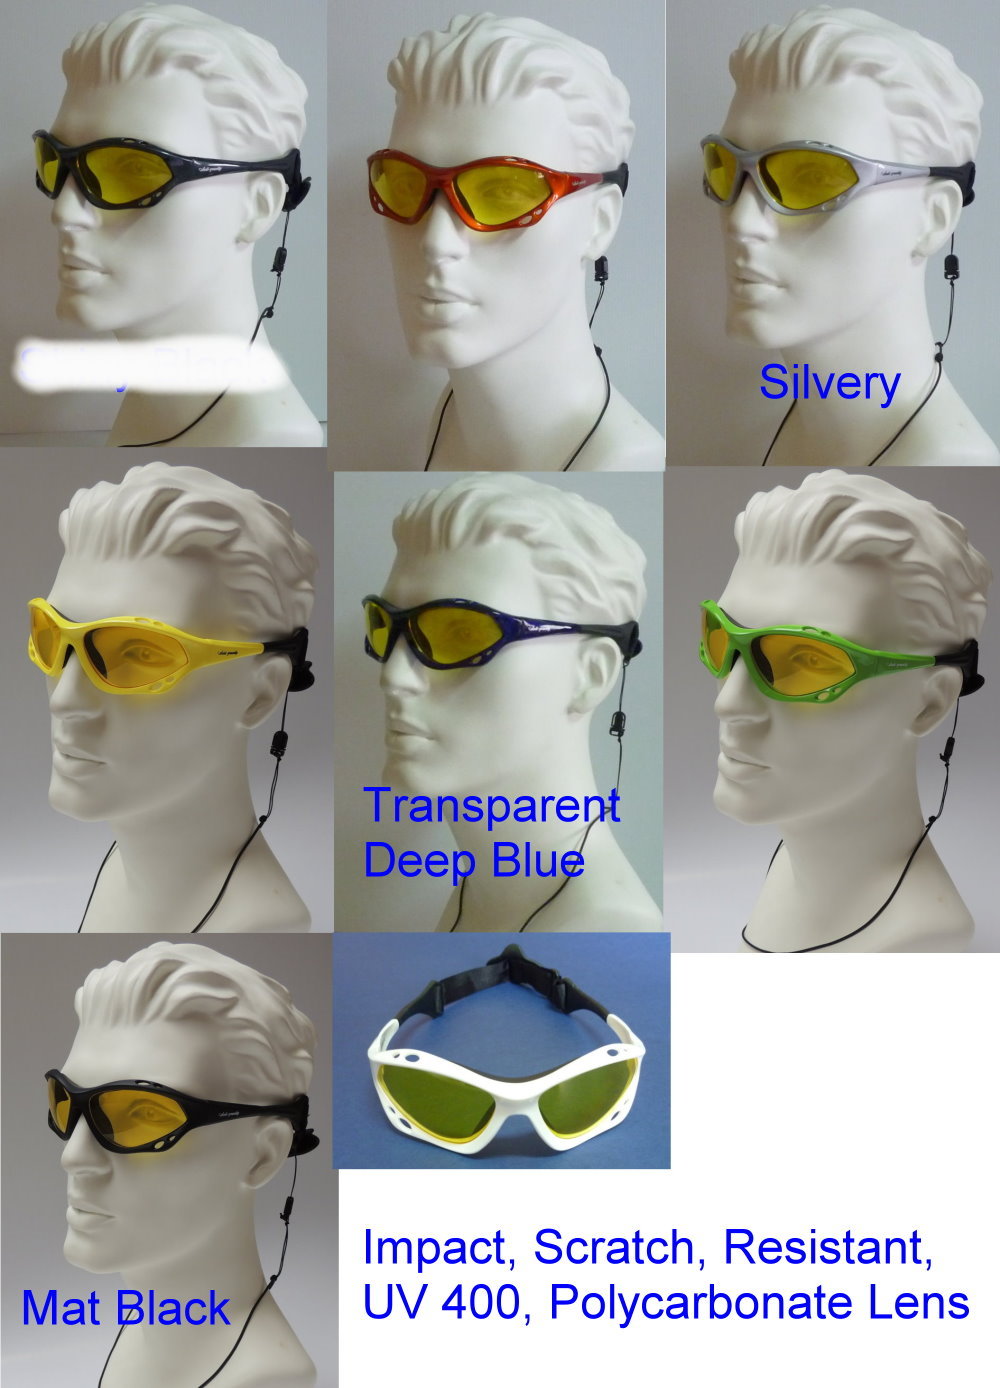 The glasses with yellow lens